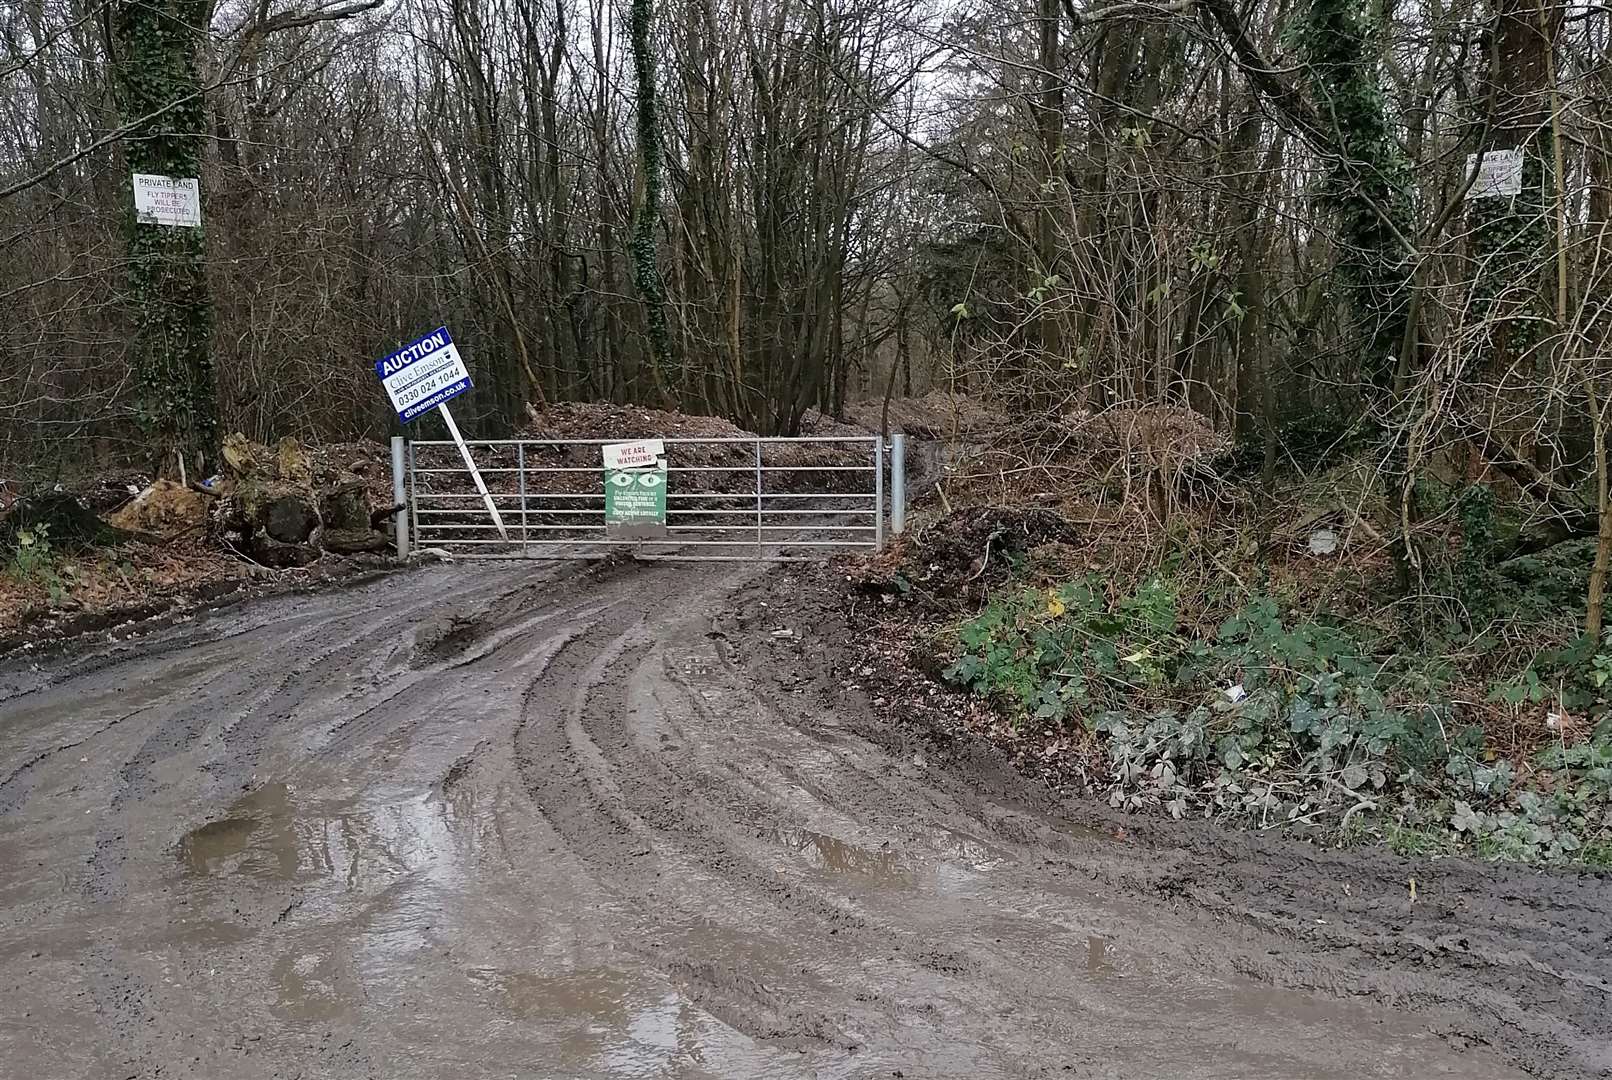 The Environment Agency has closed off the woodland following a KentOnline story in January